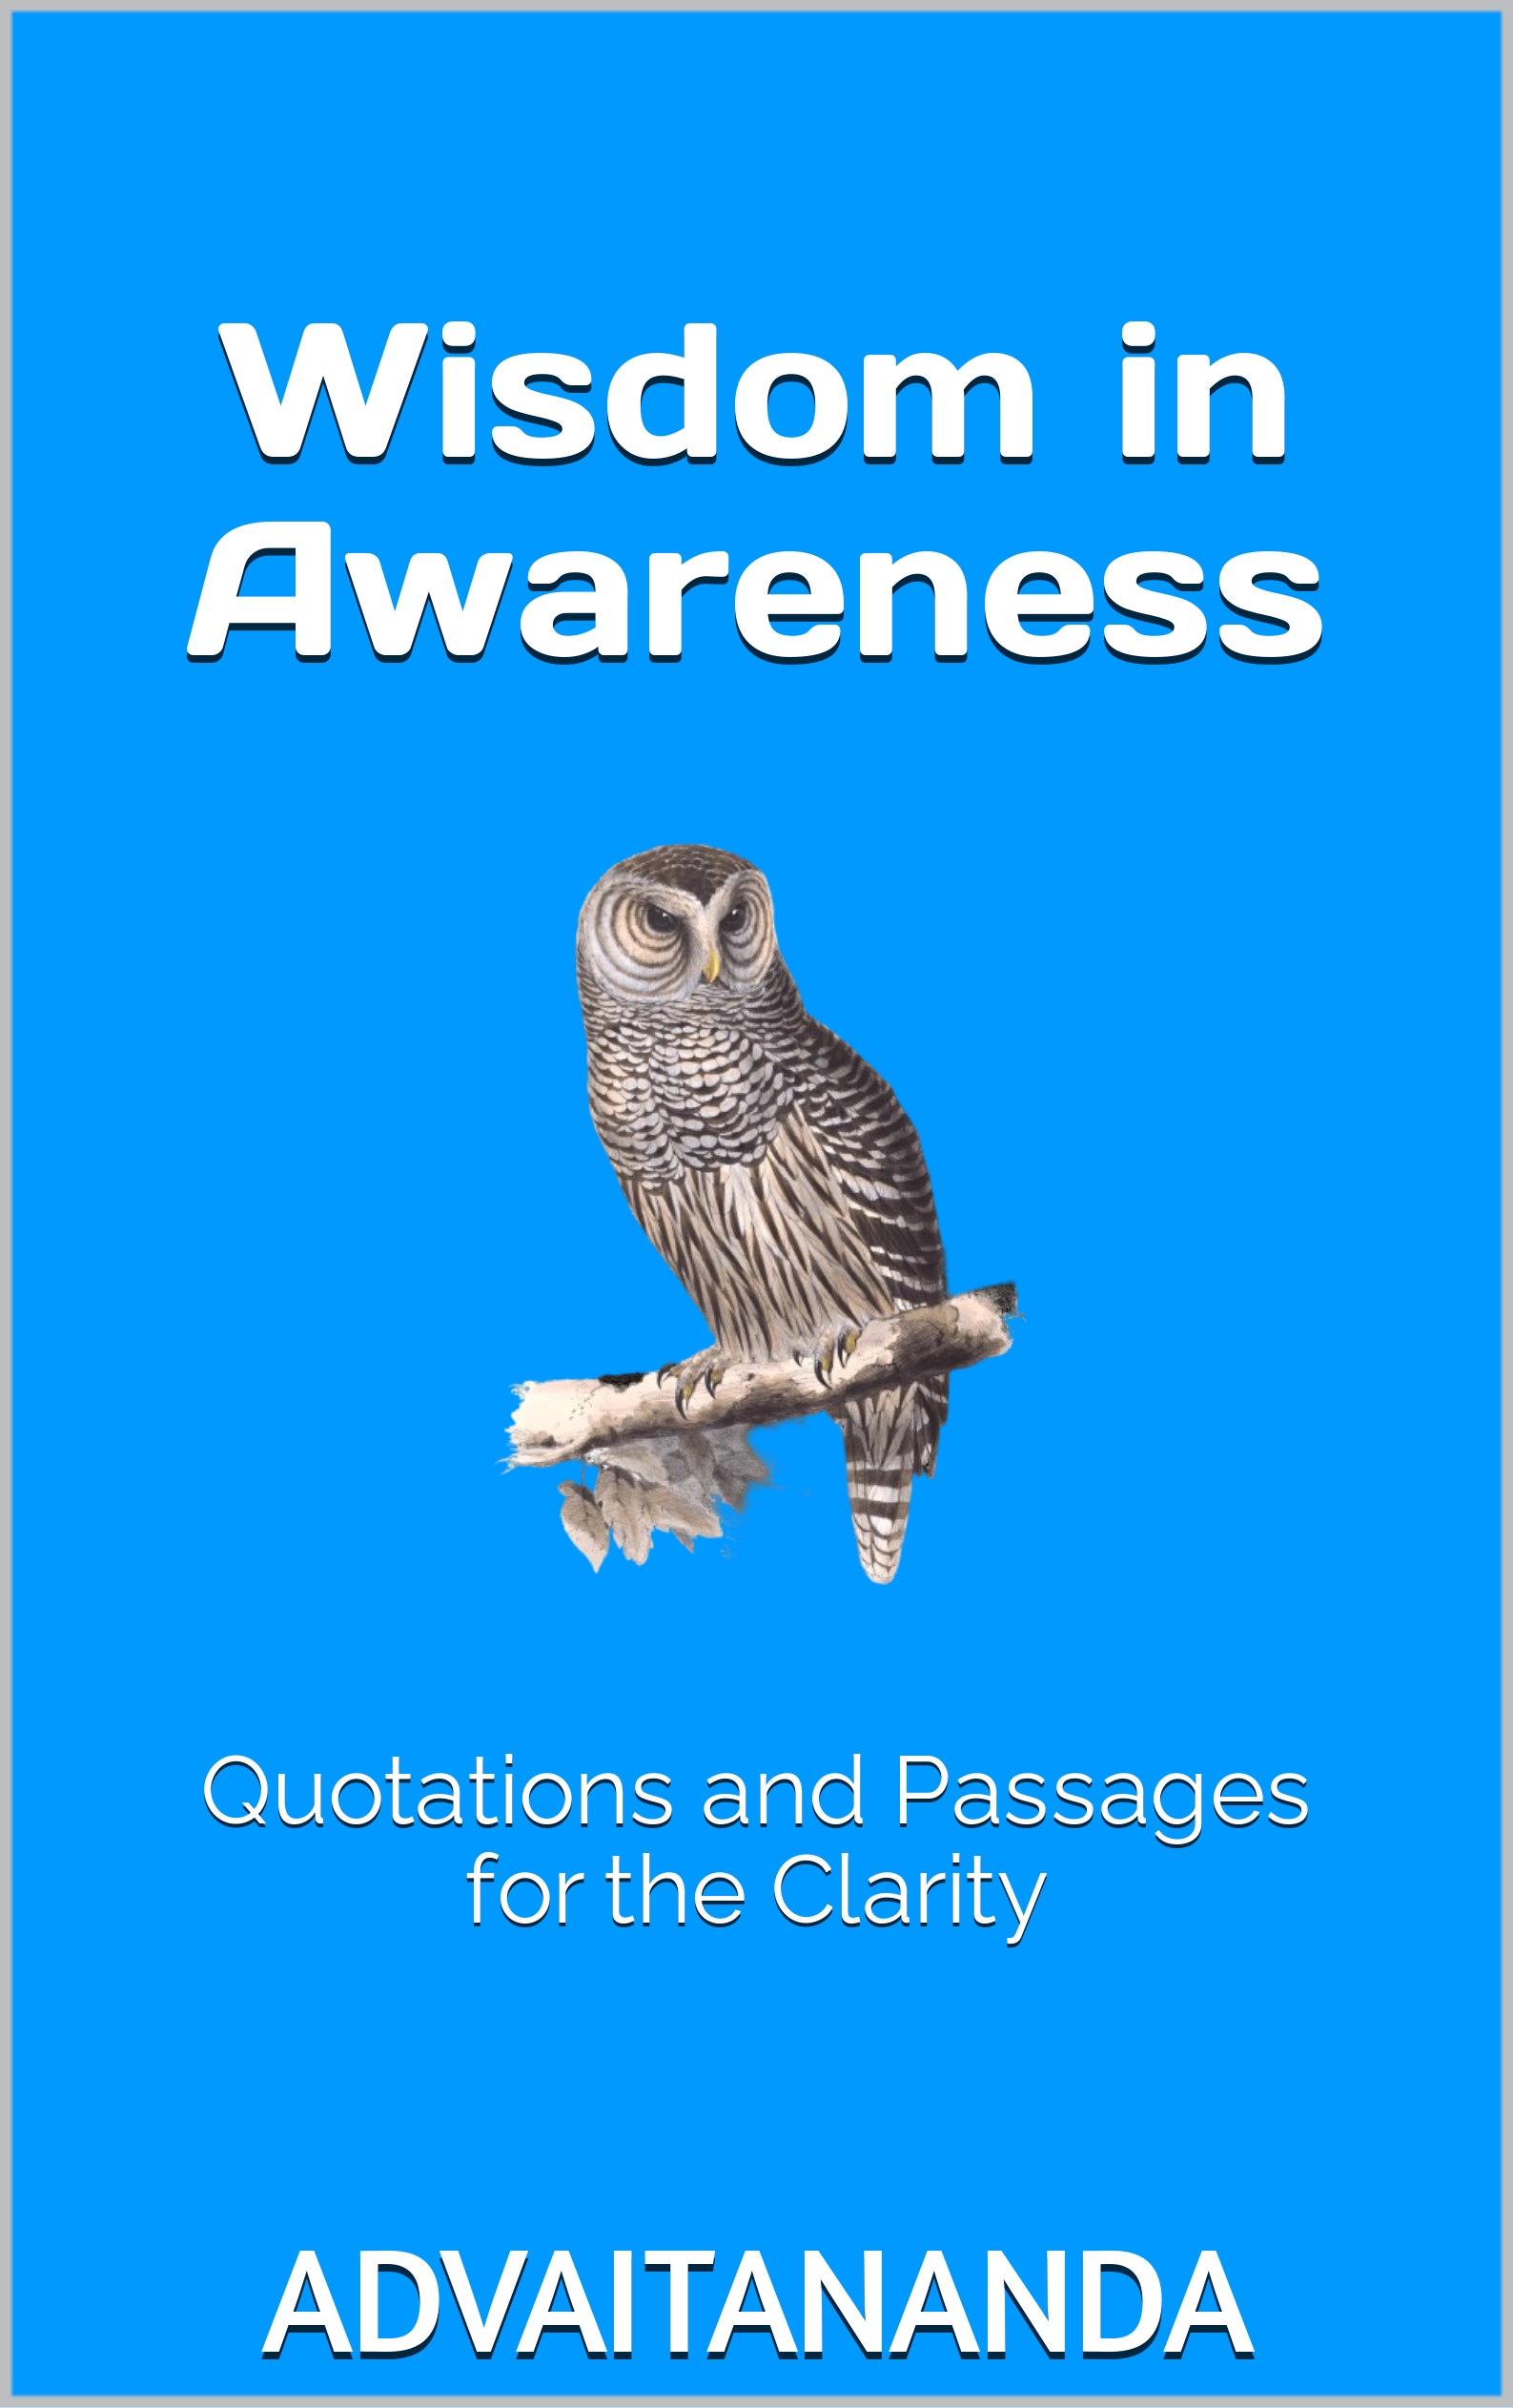 Book: Windom in Awareness - Quotations for the Clarity